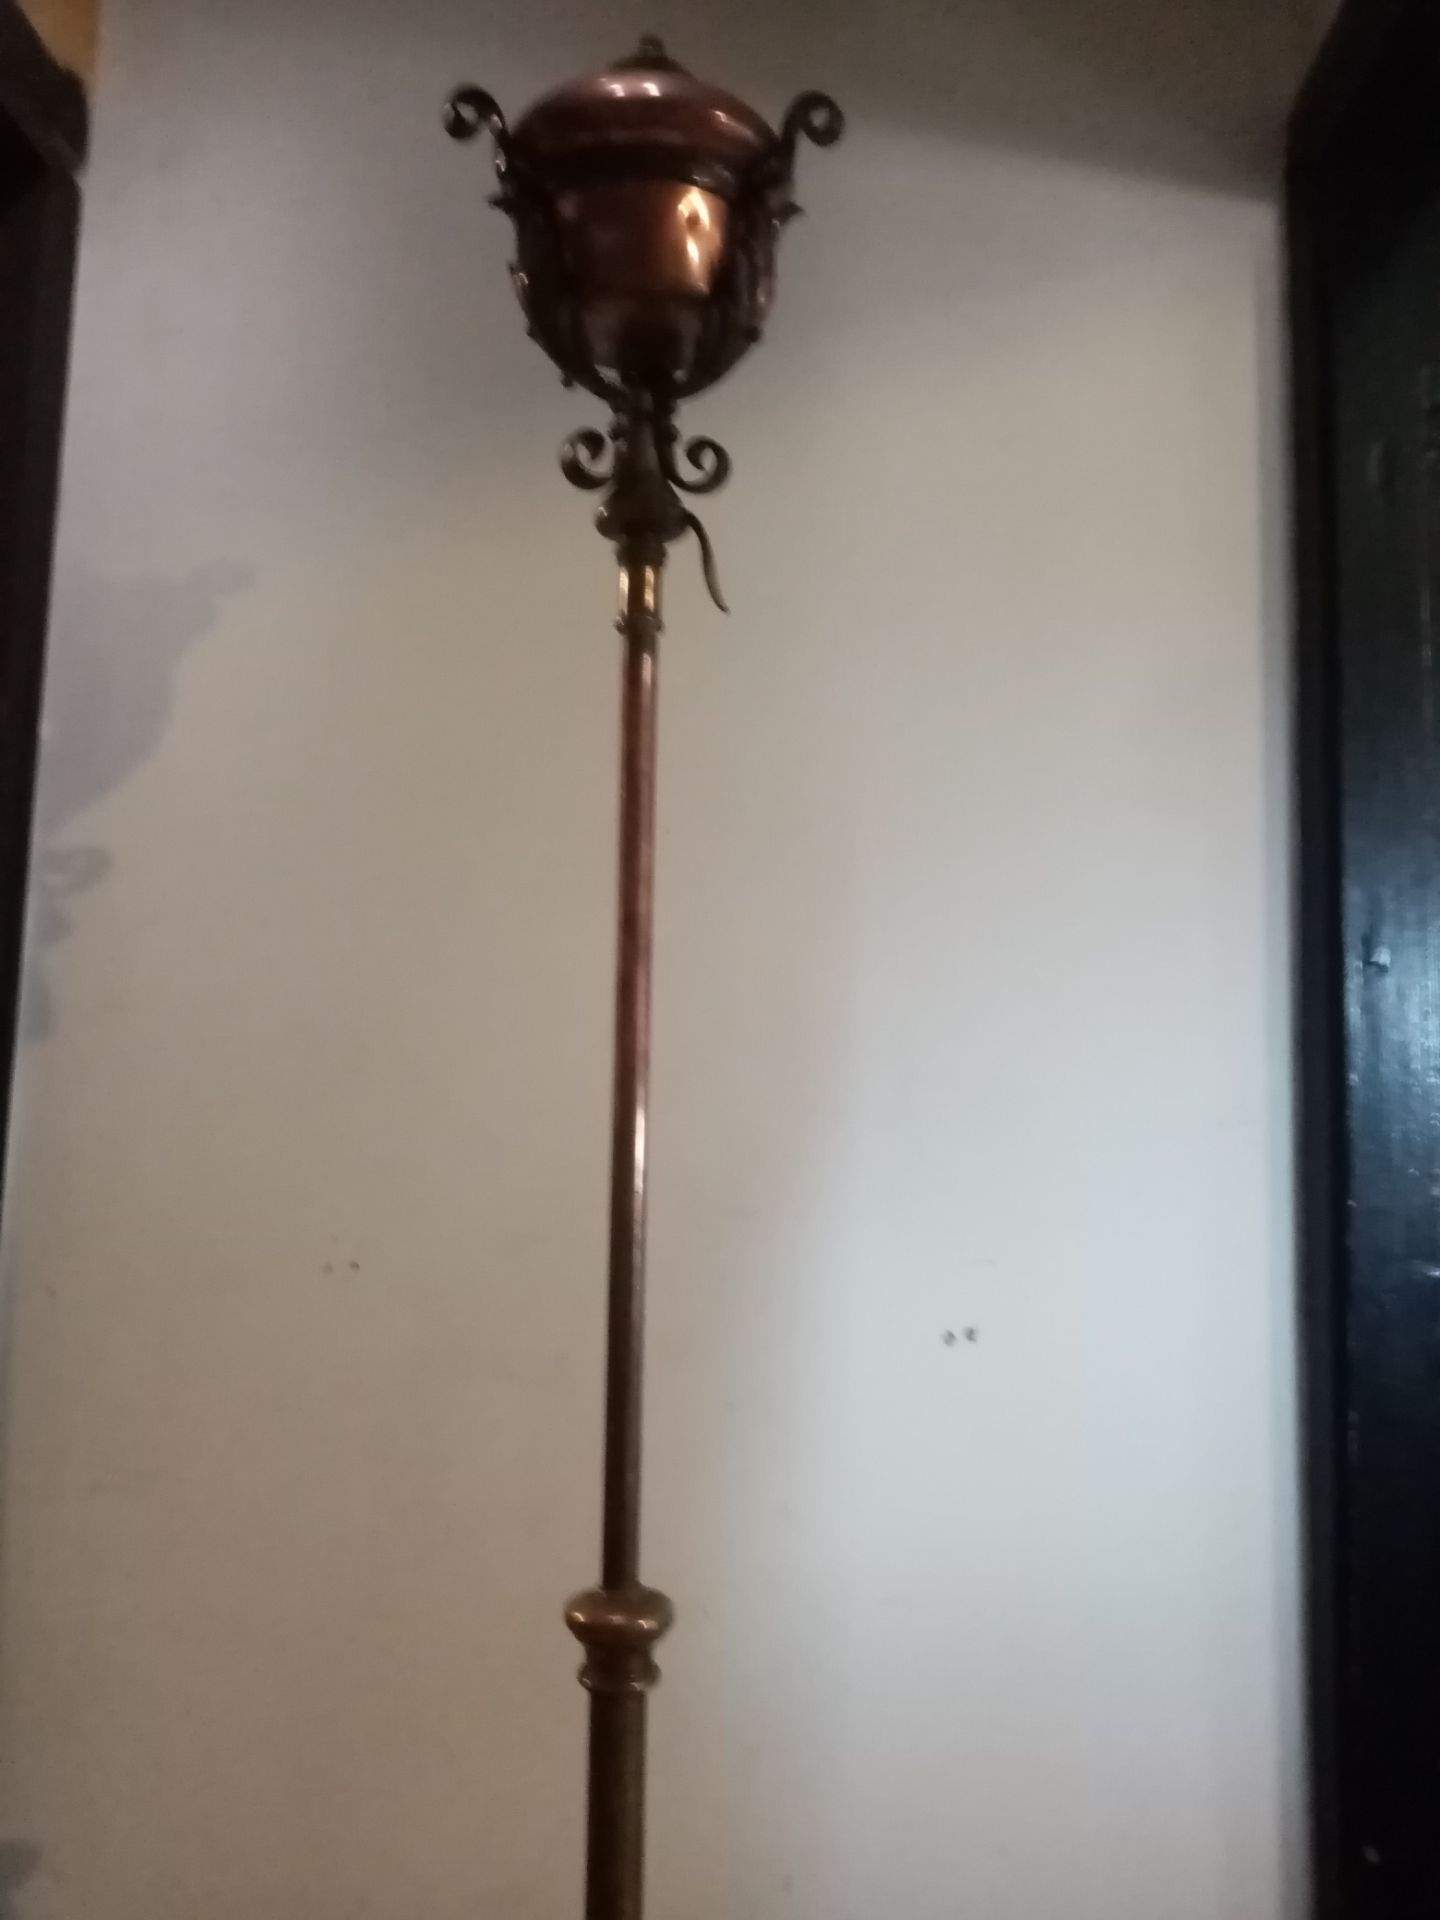 Antique Arts and Crafts W.A.S Benson Telescopic Iron/Brass/Copper Floor Lamp - Image 4 of 4